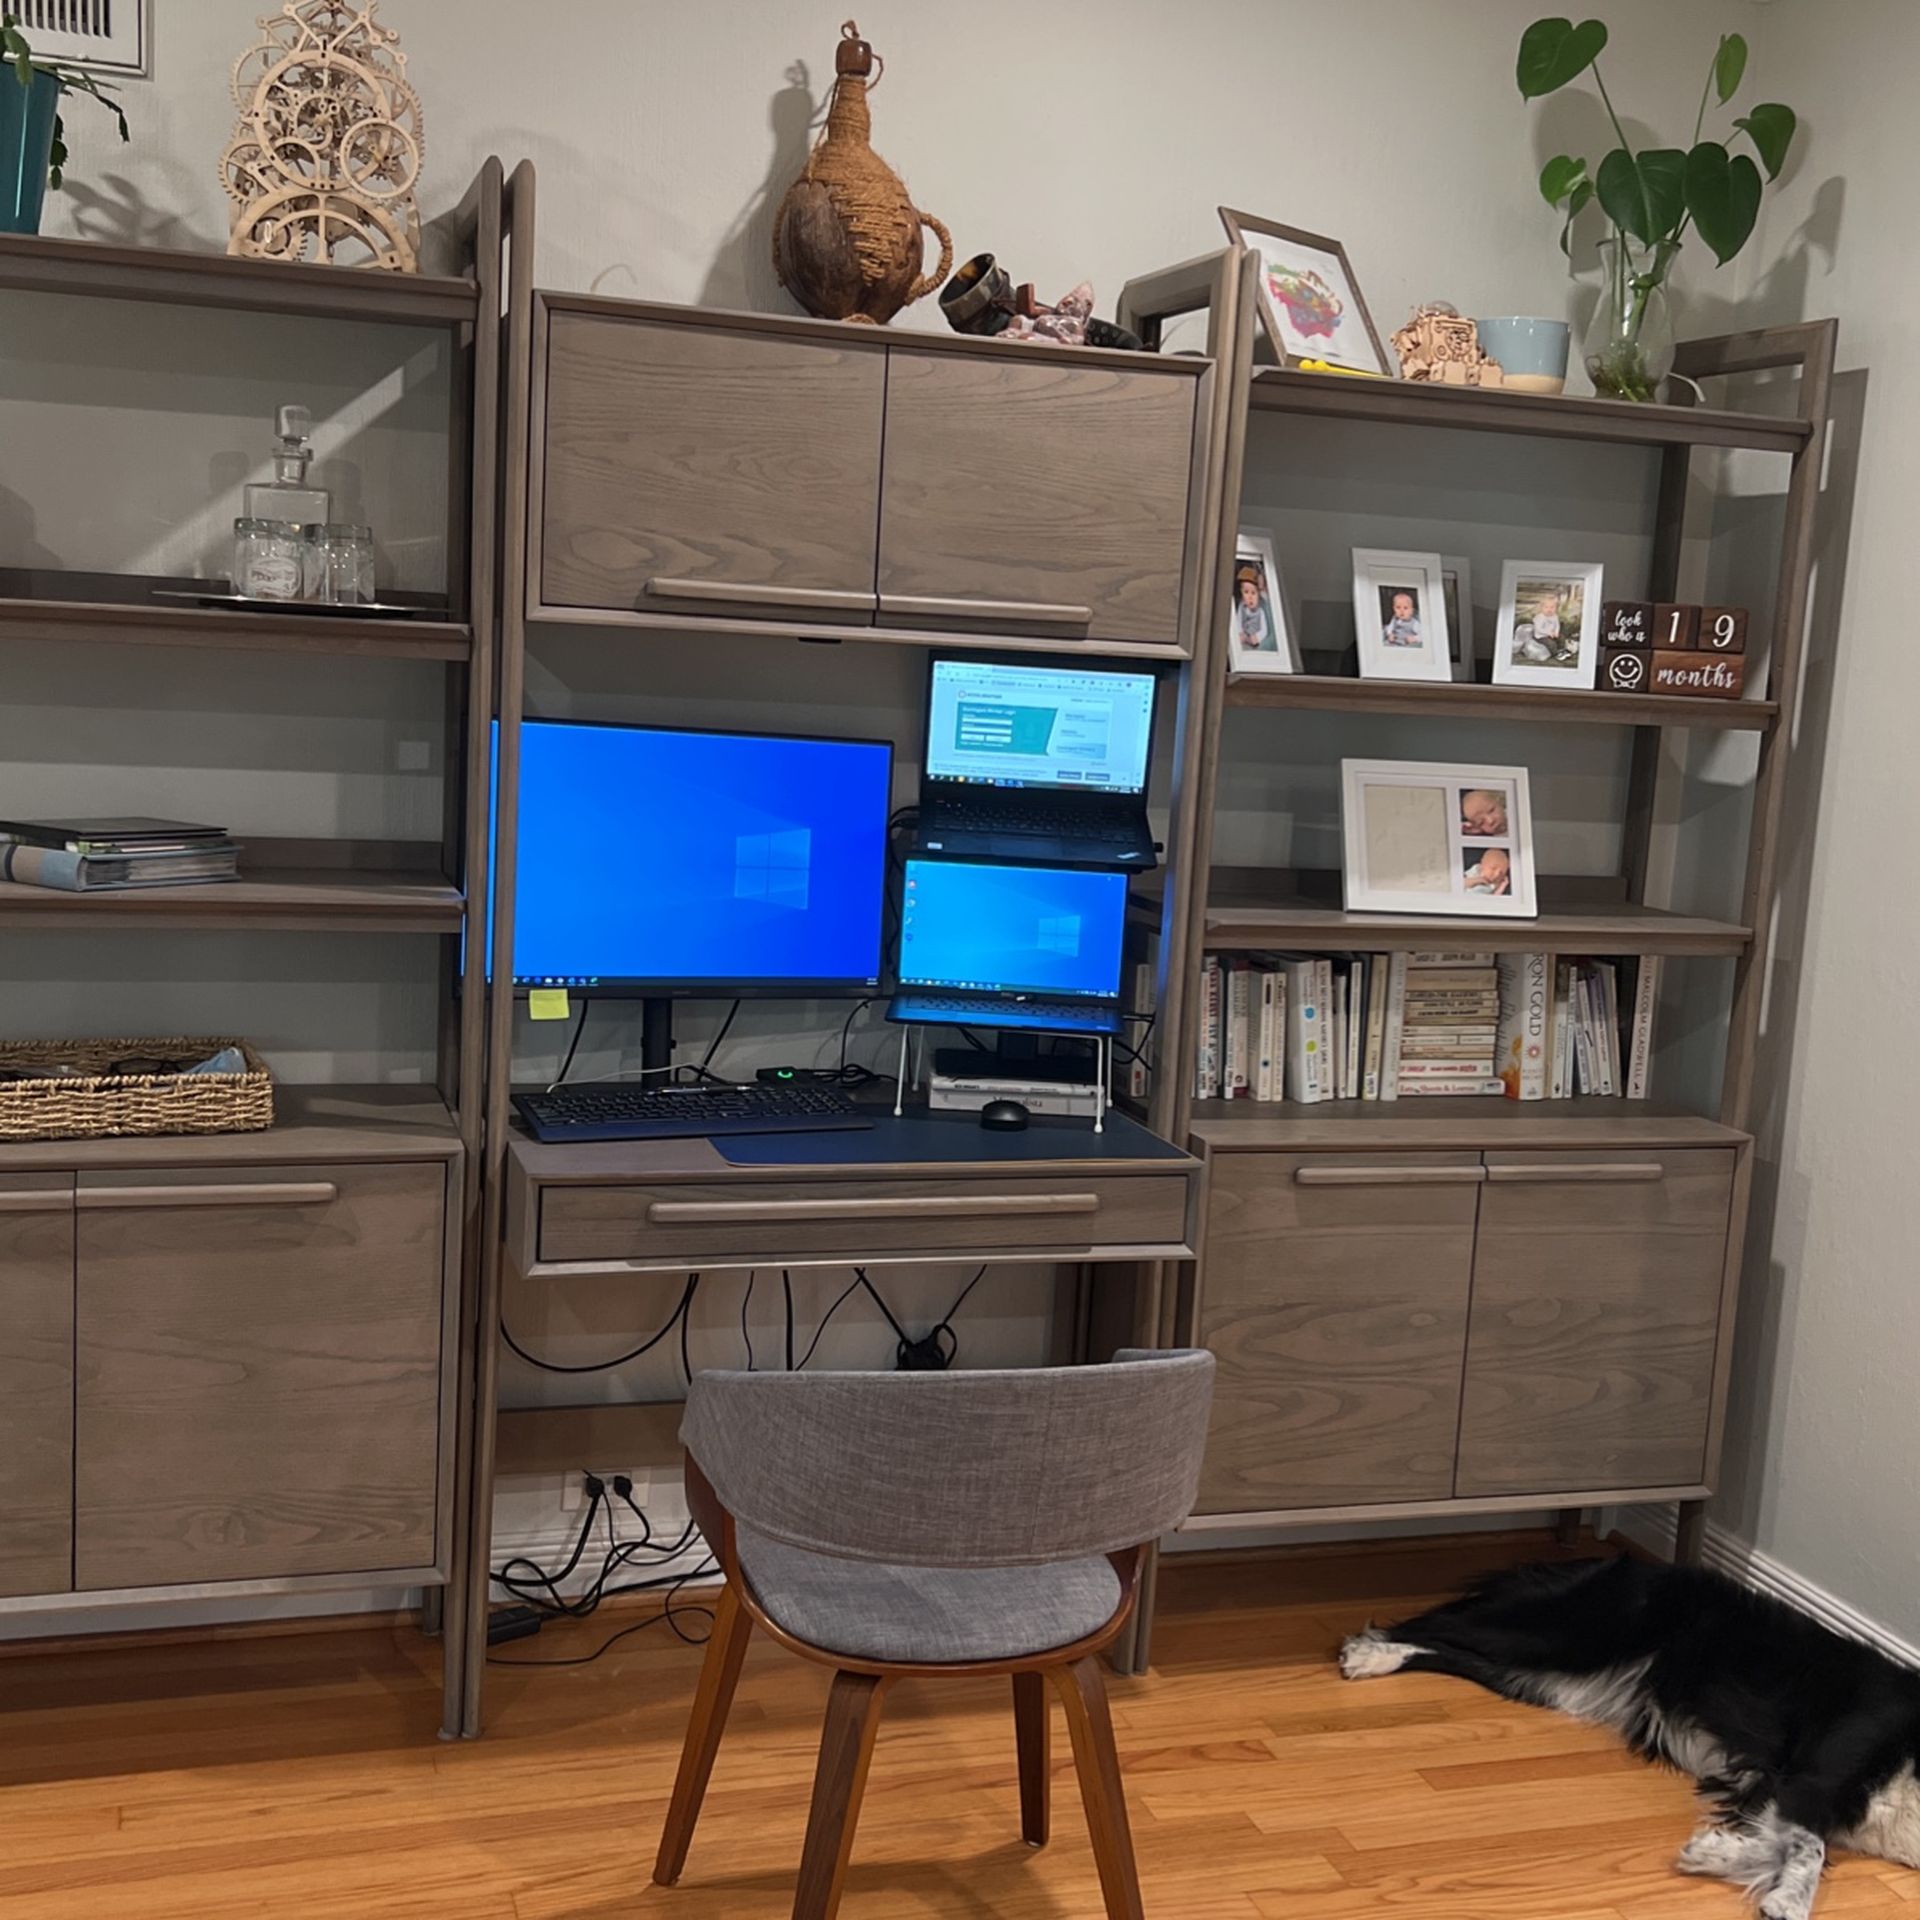 Crate and Barrel Tate Desk And Bookshelves